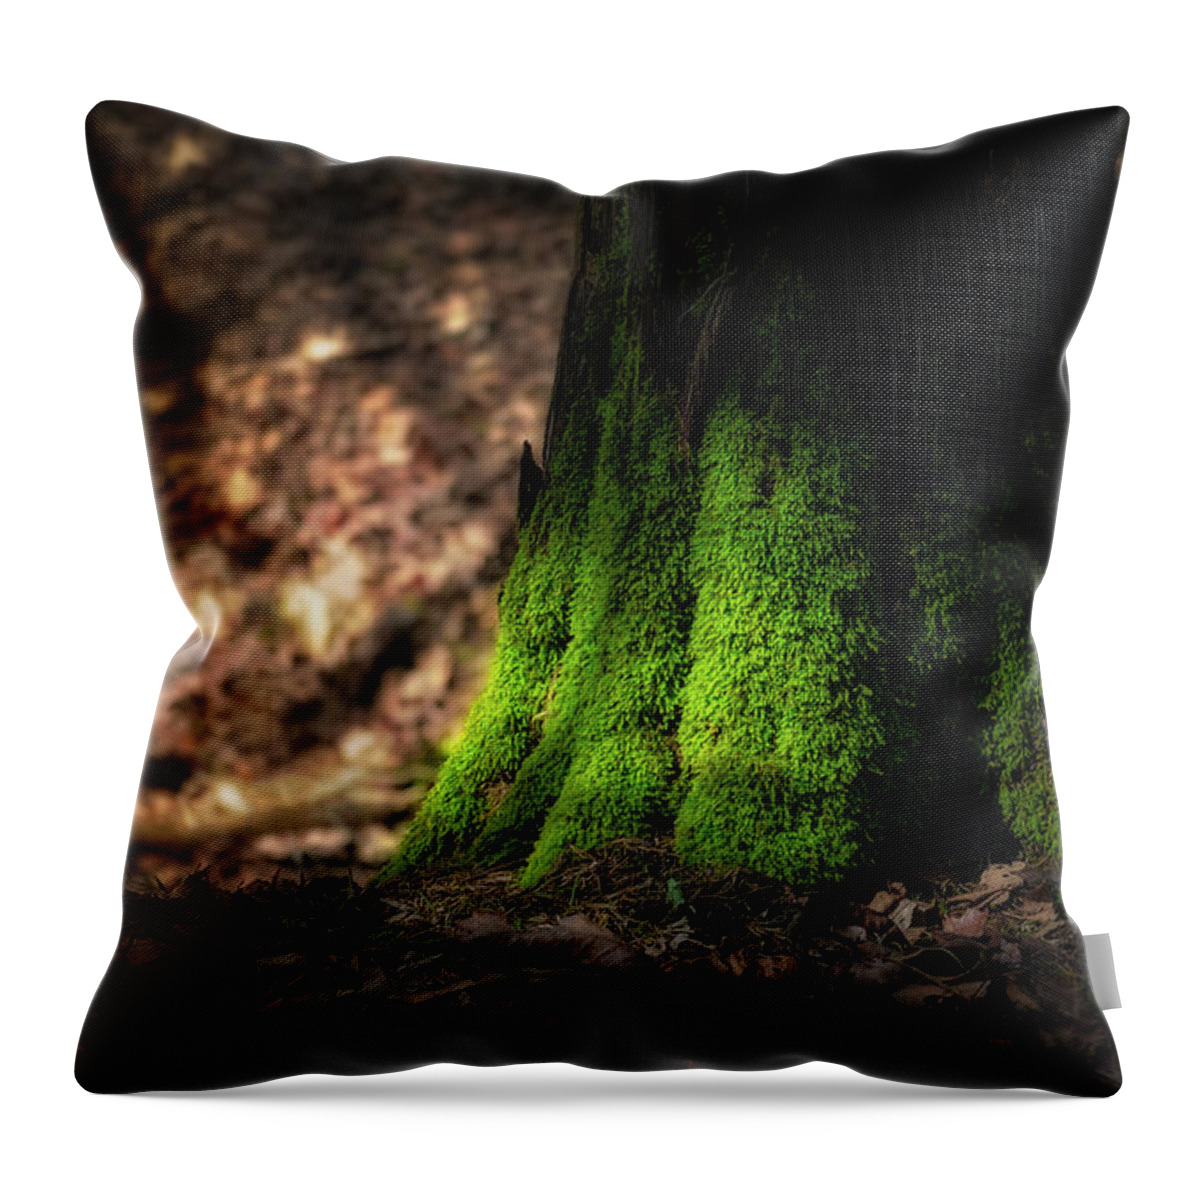  Bryophyta Throw Pillow featuring the photograph Mossy Tree by James Barber